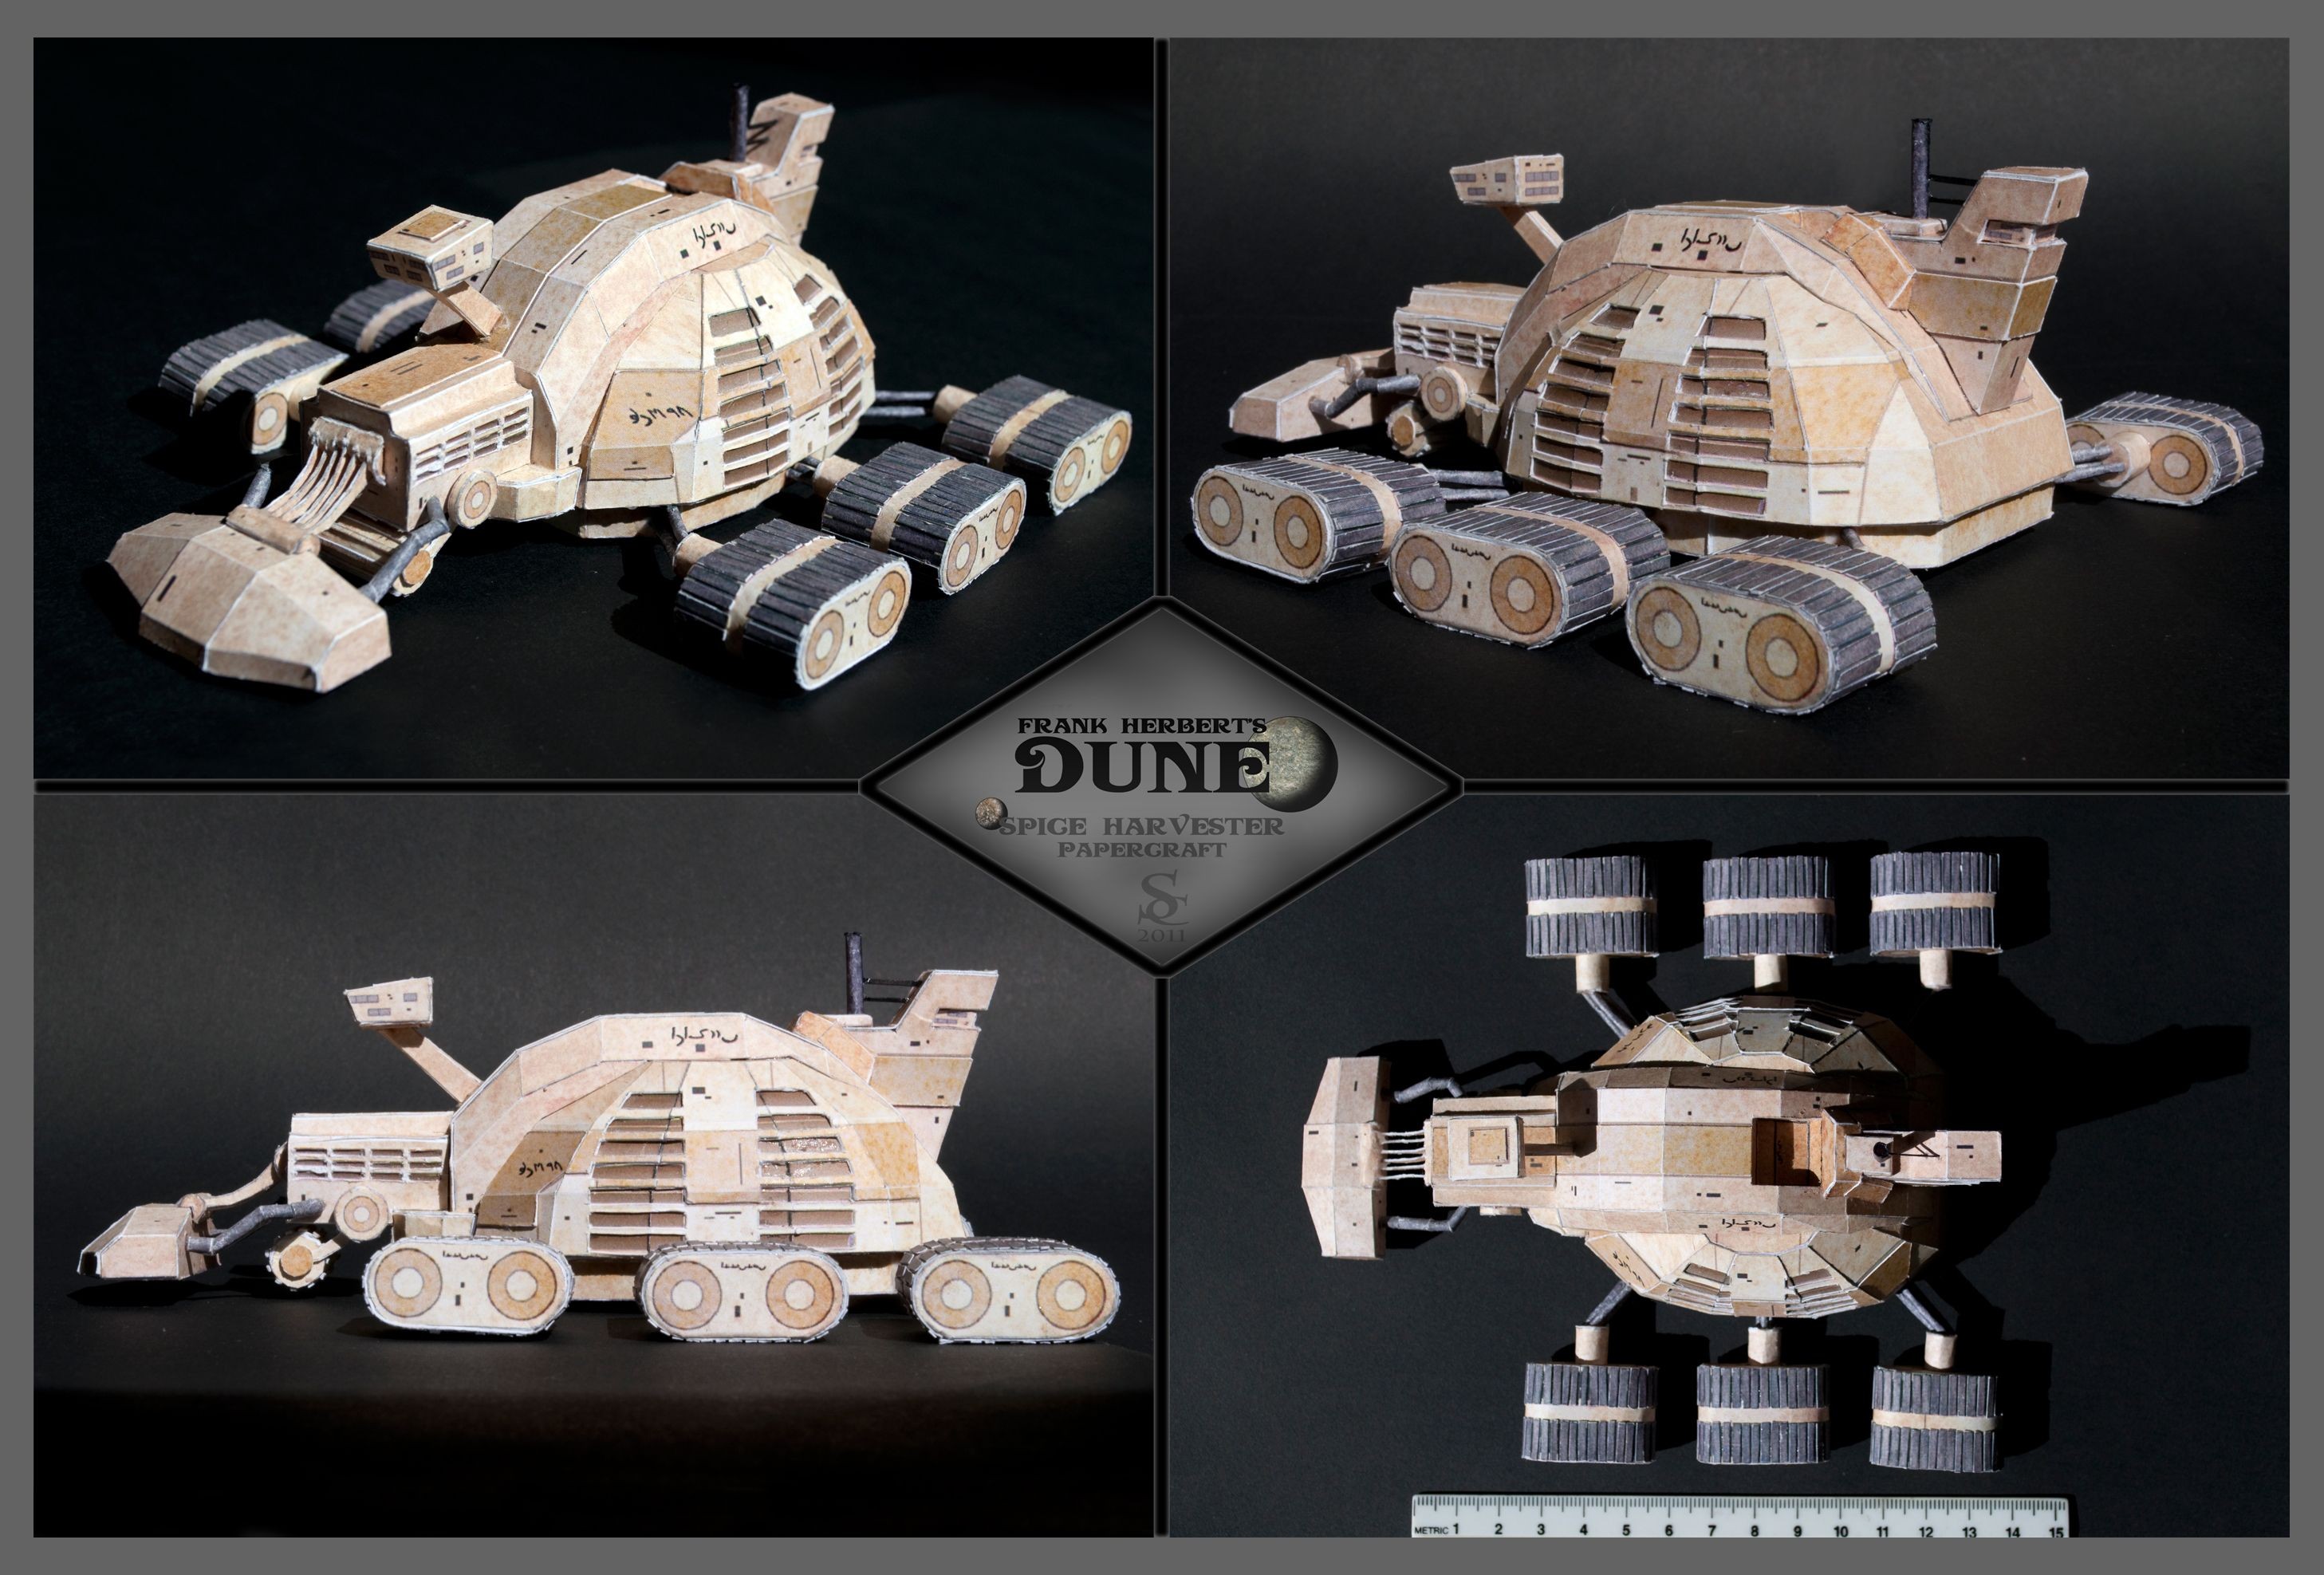 Lego Papercraft Spice Harvester Paper Craft Awesome Dune